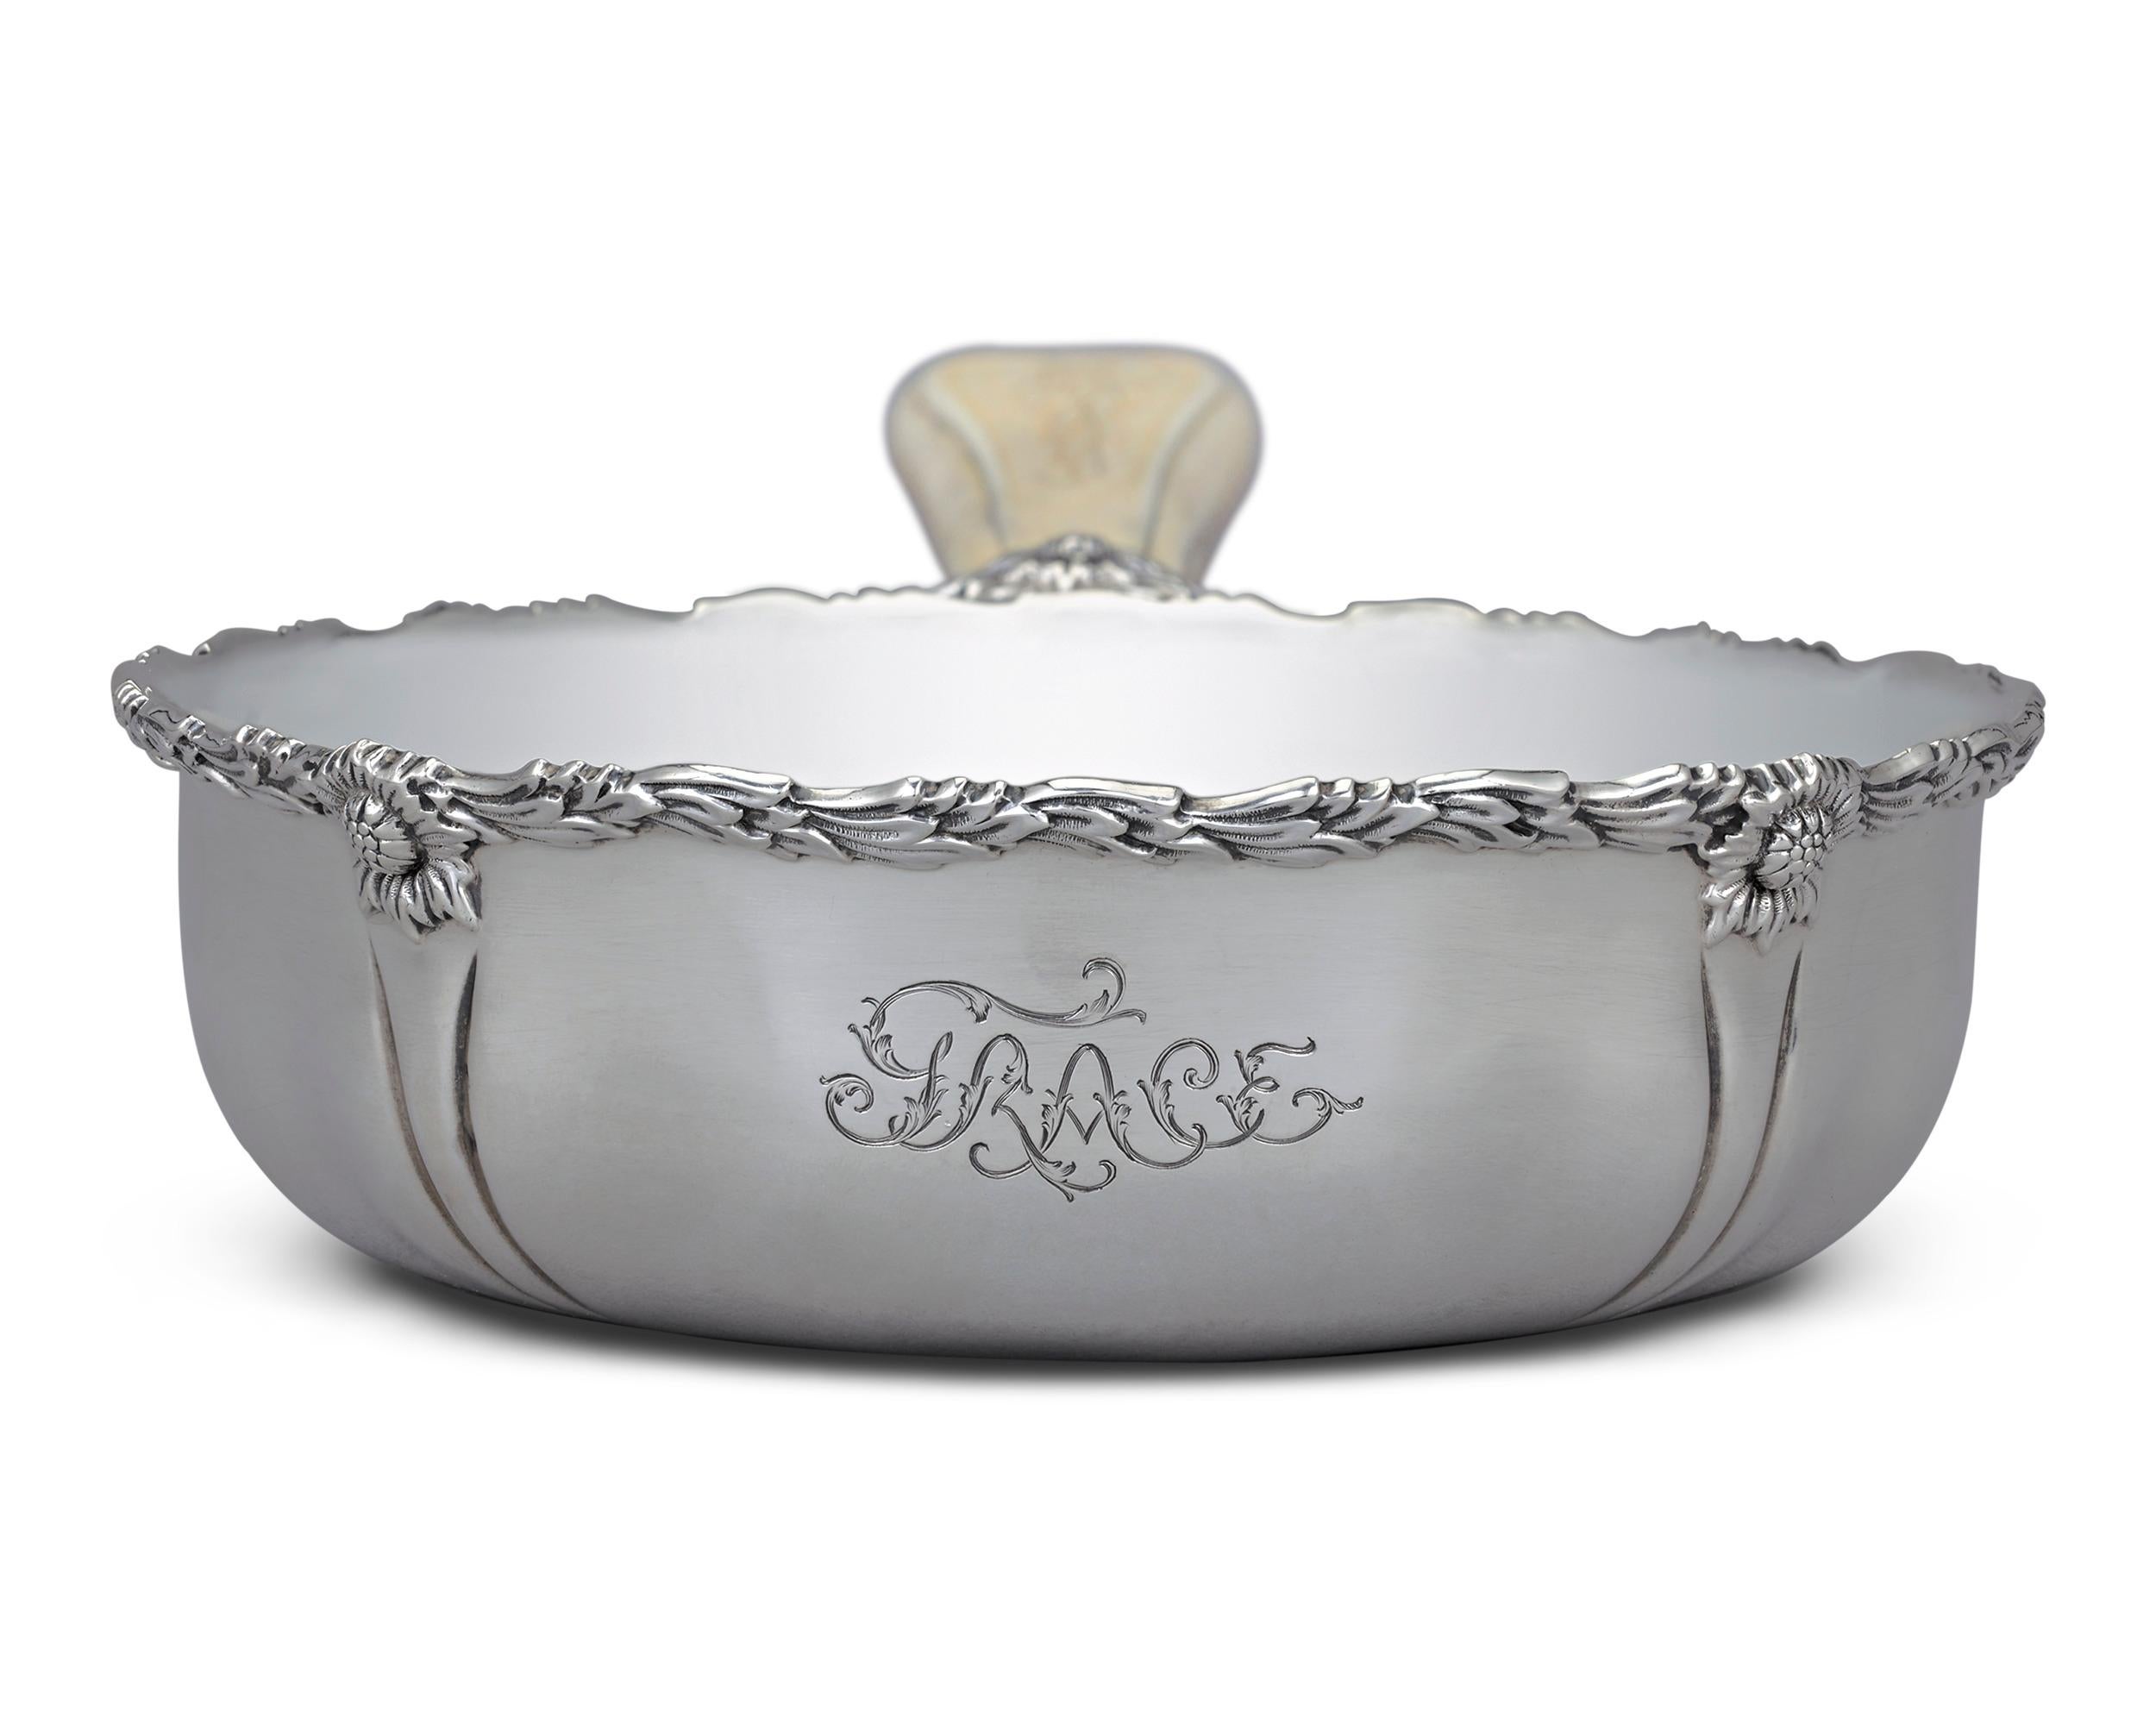 Crafted by the legendary Tiffany & Co., this rare sterling silver child's porridge bowl was crafted with a little one in mind. One of Tiffany’s most charming pieces, the bowl is adorned by the highly popular Chrysanthemum pattern, and features a